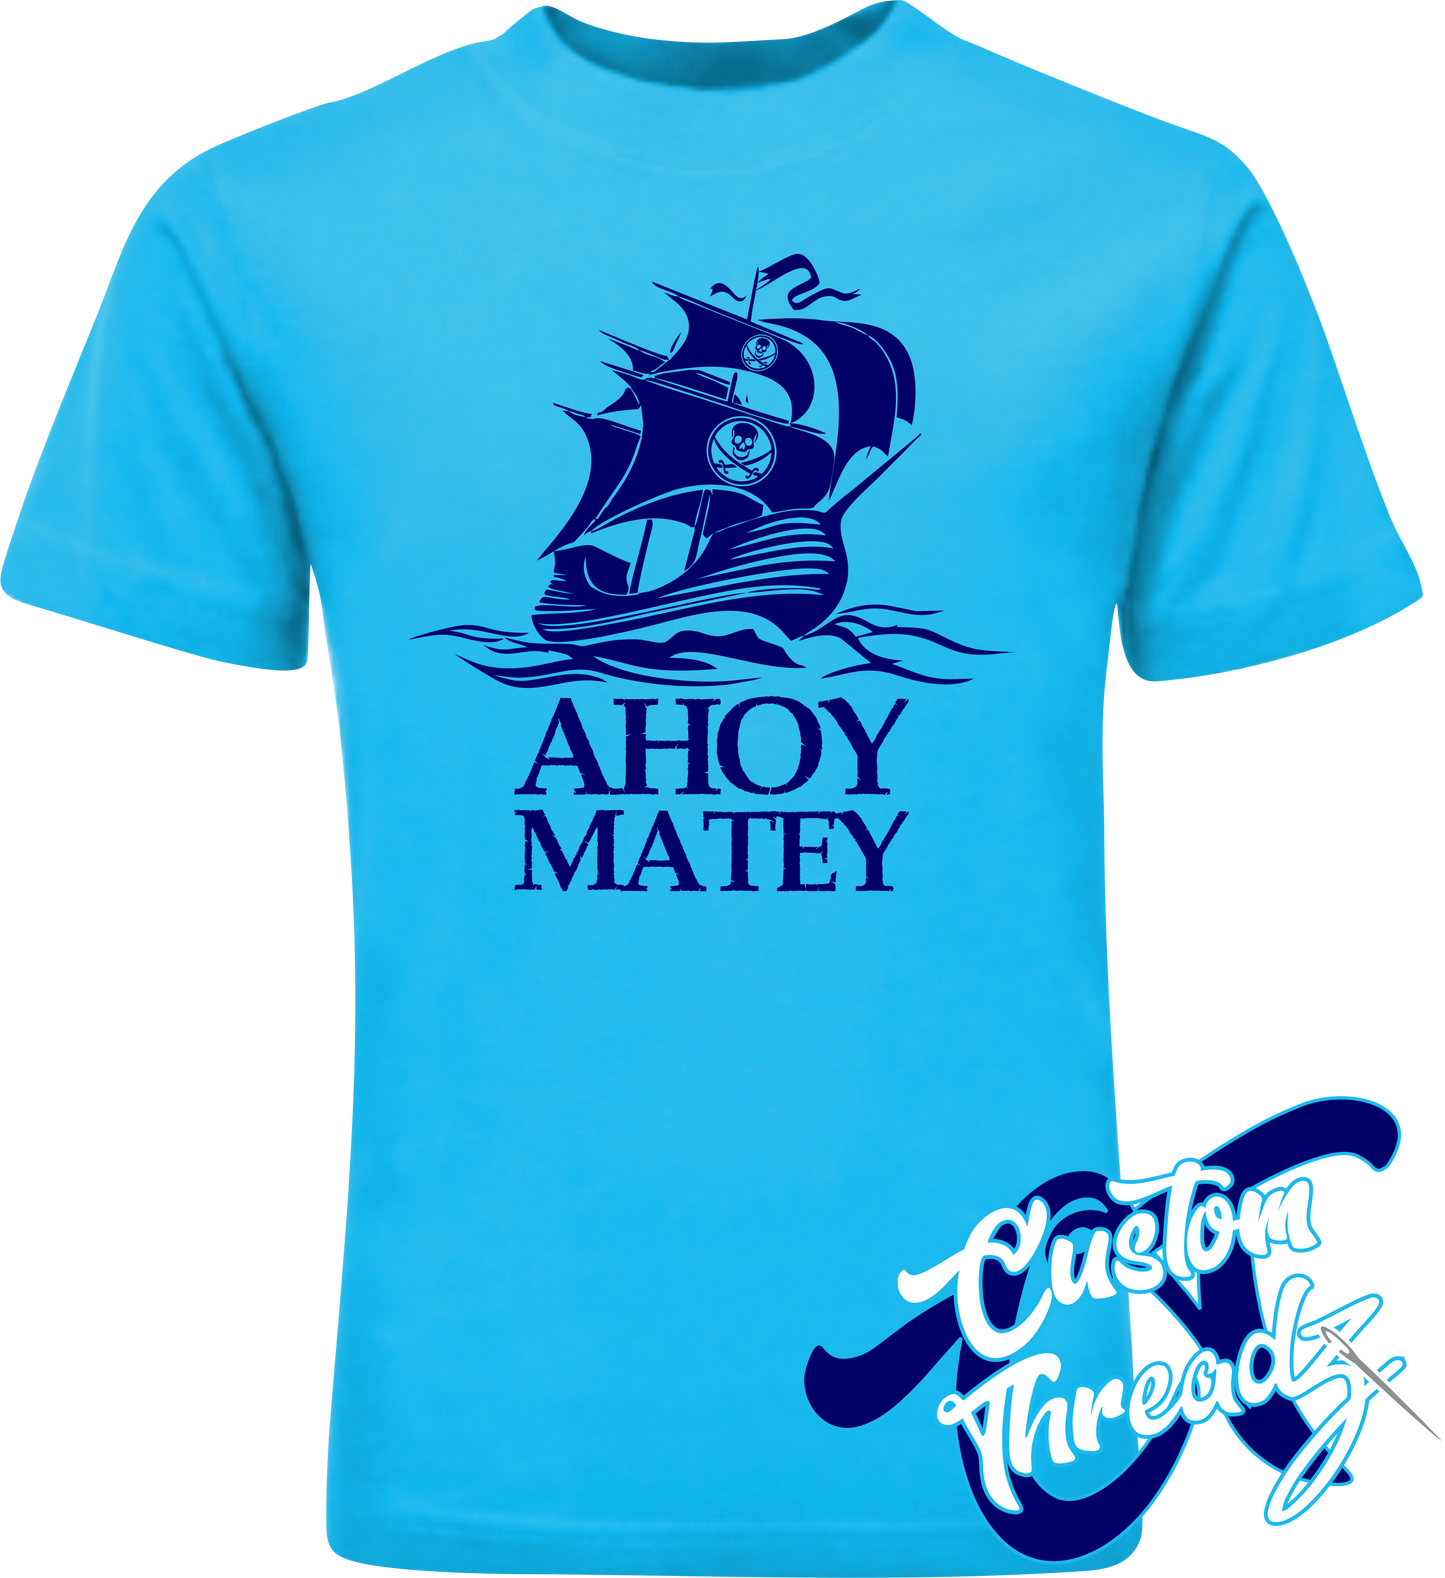 aquatic blue tee with ahoy matey pirate ship DTG printed design